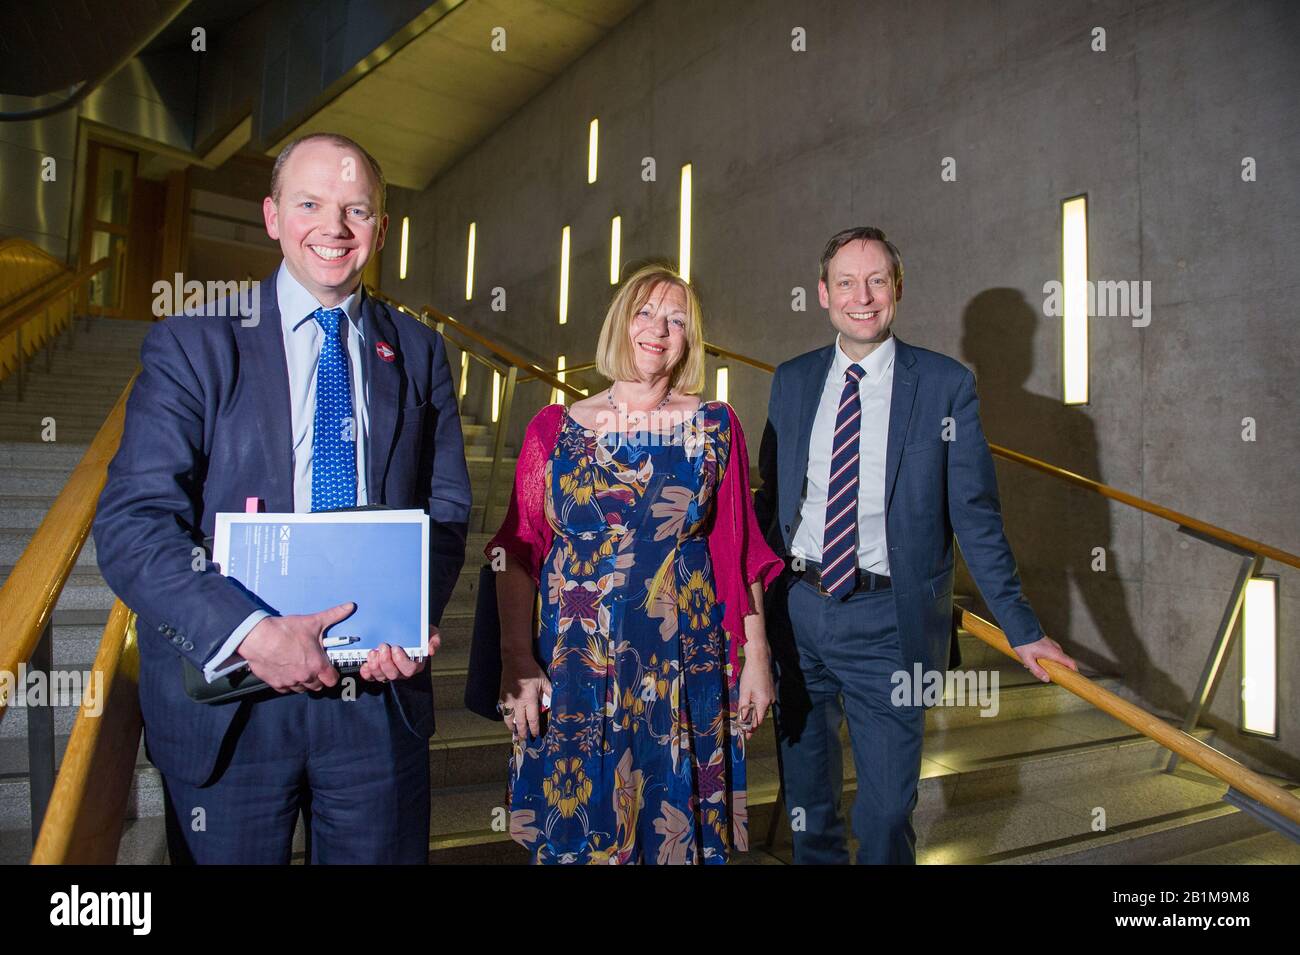 Edinburgh, UK. 26th Feb, 2020. Pictured: (L-R) Donald Cameron MSP - Shadow Cabinet Secretary for Finance; Linda Fabiani MSP - Deputy Presiding Officer and Member for East Kilbride for the Scottish National Party (SNP); Liam Kerr MSP - Deputy Leader, Shadow Cabinet Secretary for Justice. Scenes from thee Scottish Parliament after decision time in the Chamber. Credit: Colin Fisher/Alamy Live News Stock Photo